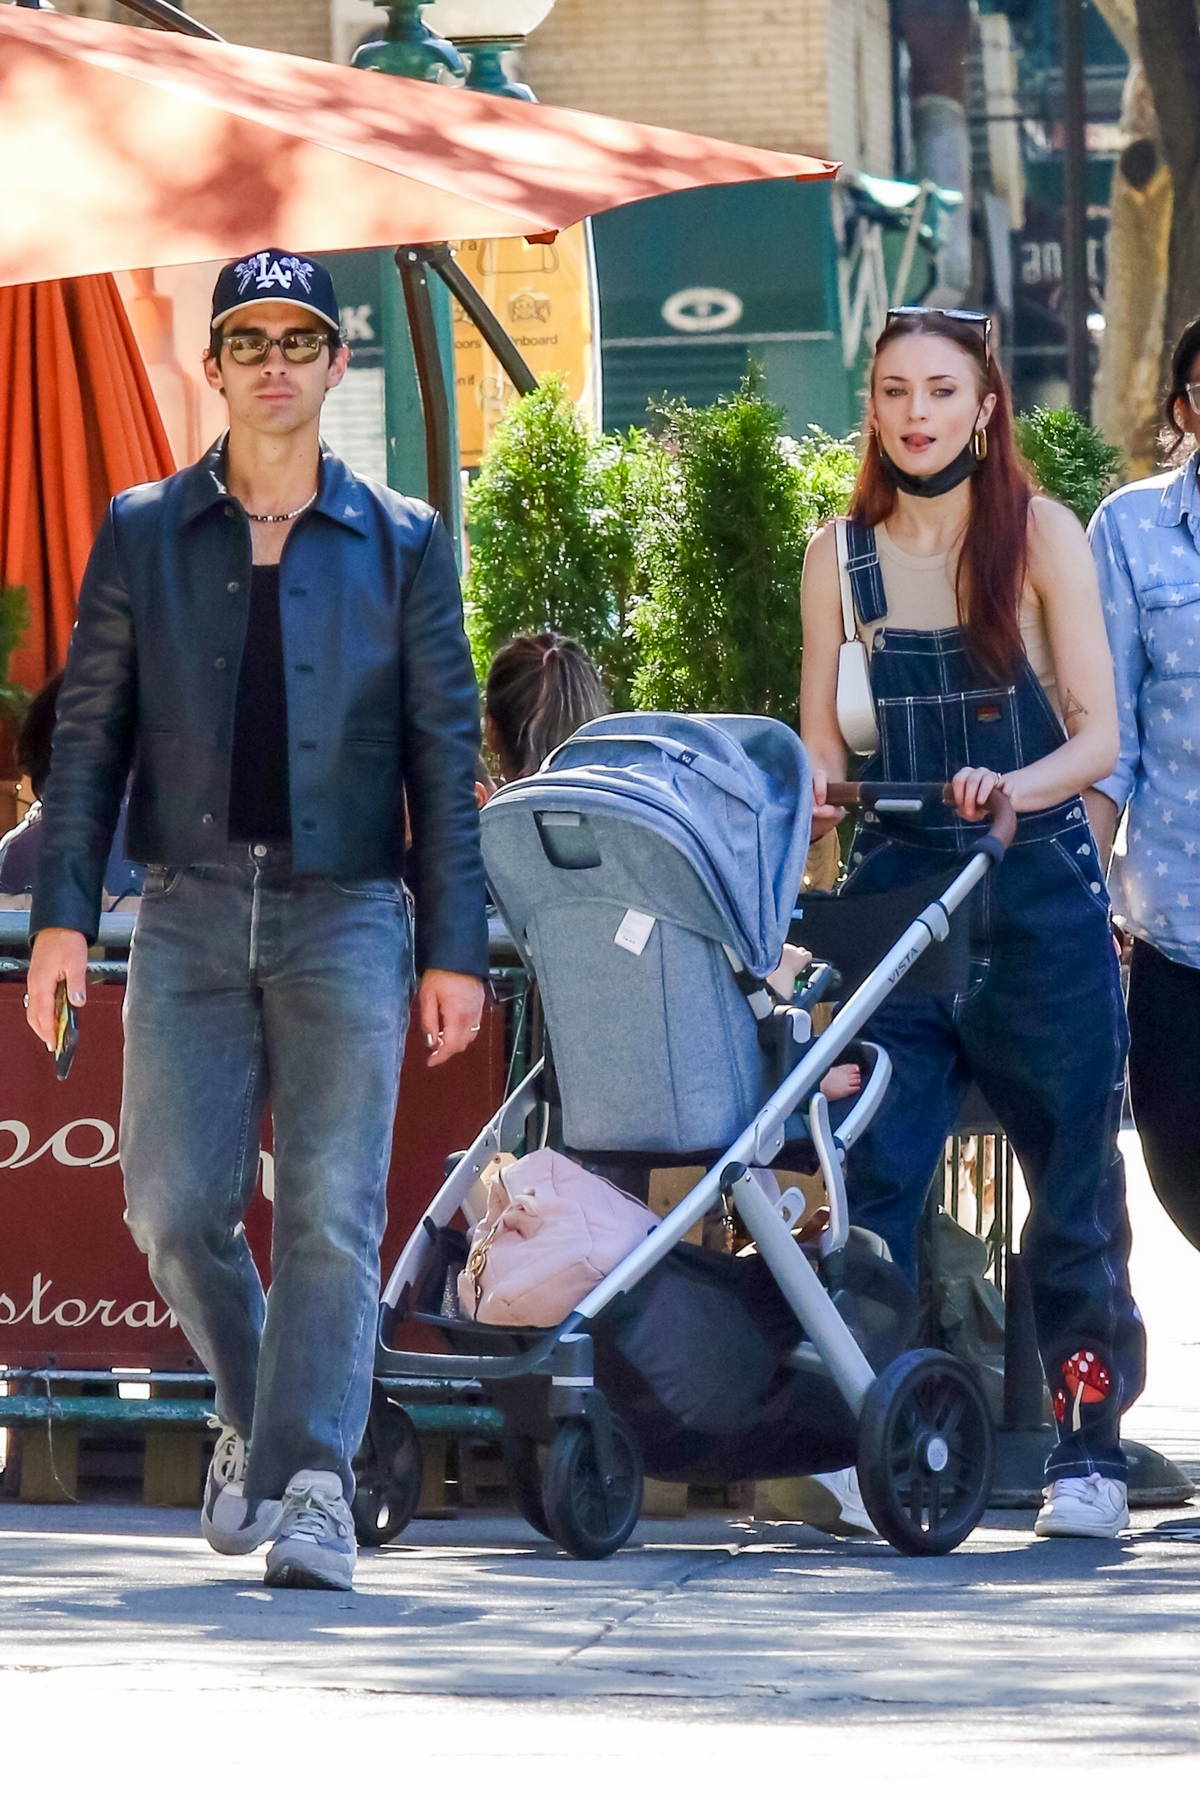 Sophie Turner rocks 70s chic trousers as she and Joe Jonas take baby Willa  out in her stroller